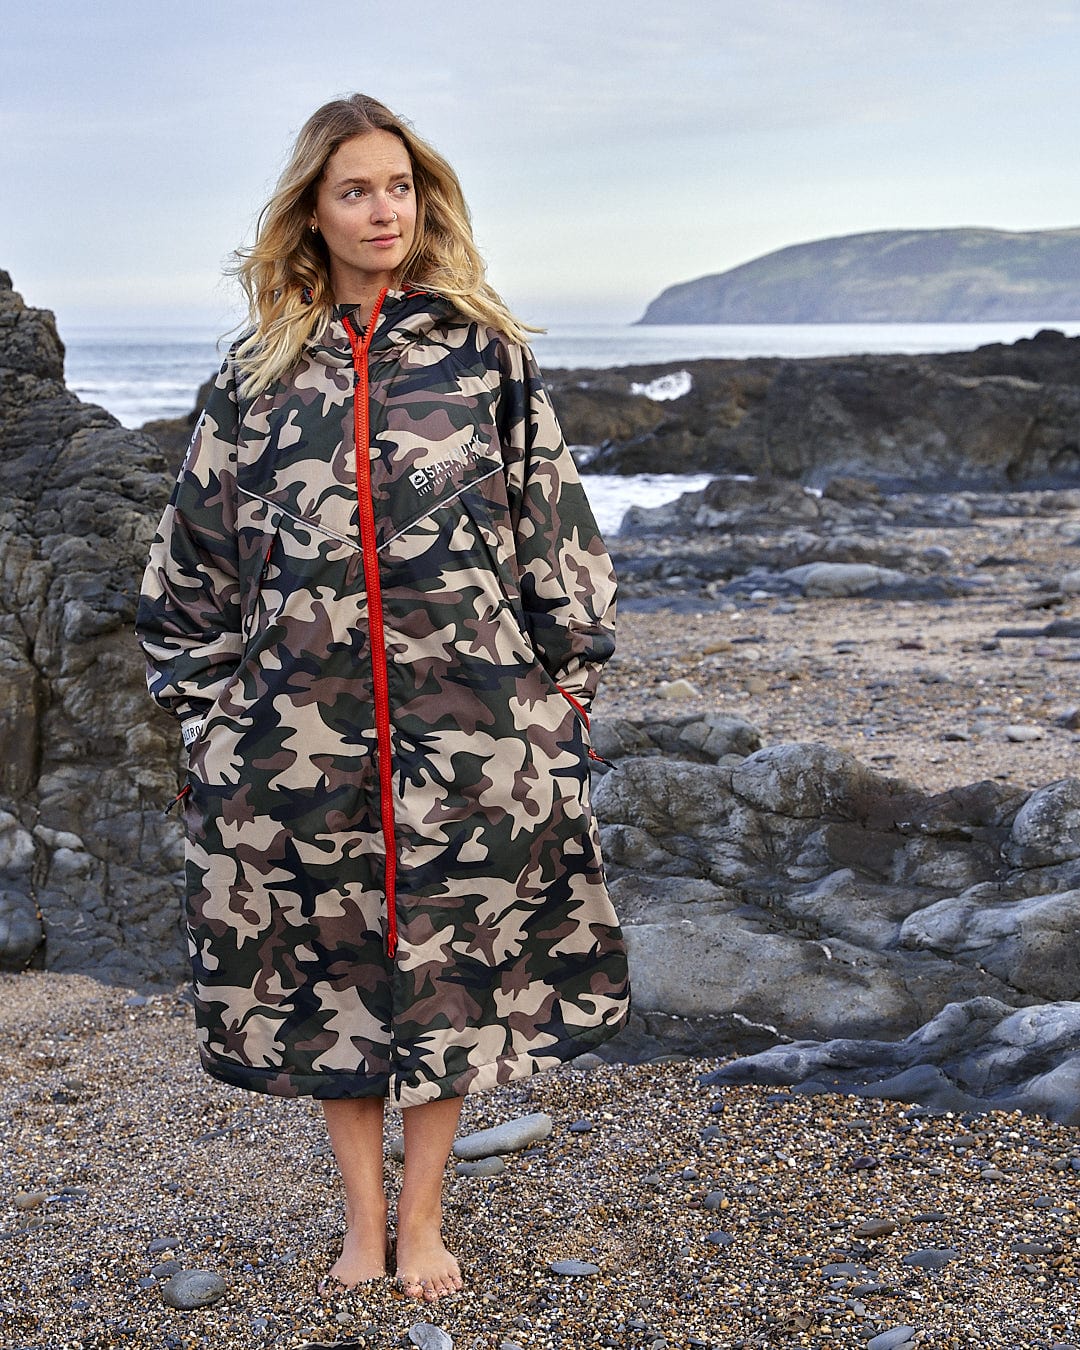 Woman in a Saltrock Recycled Four Seasons Changing Robe - Brown Camo standing on a rocky beach with the ocean in the background.